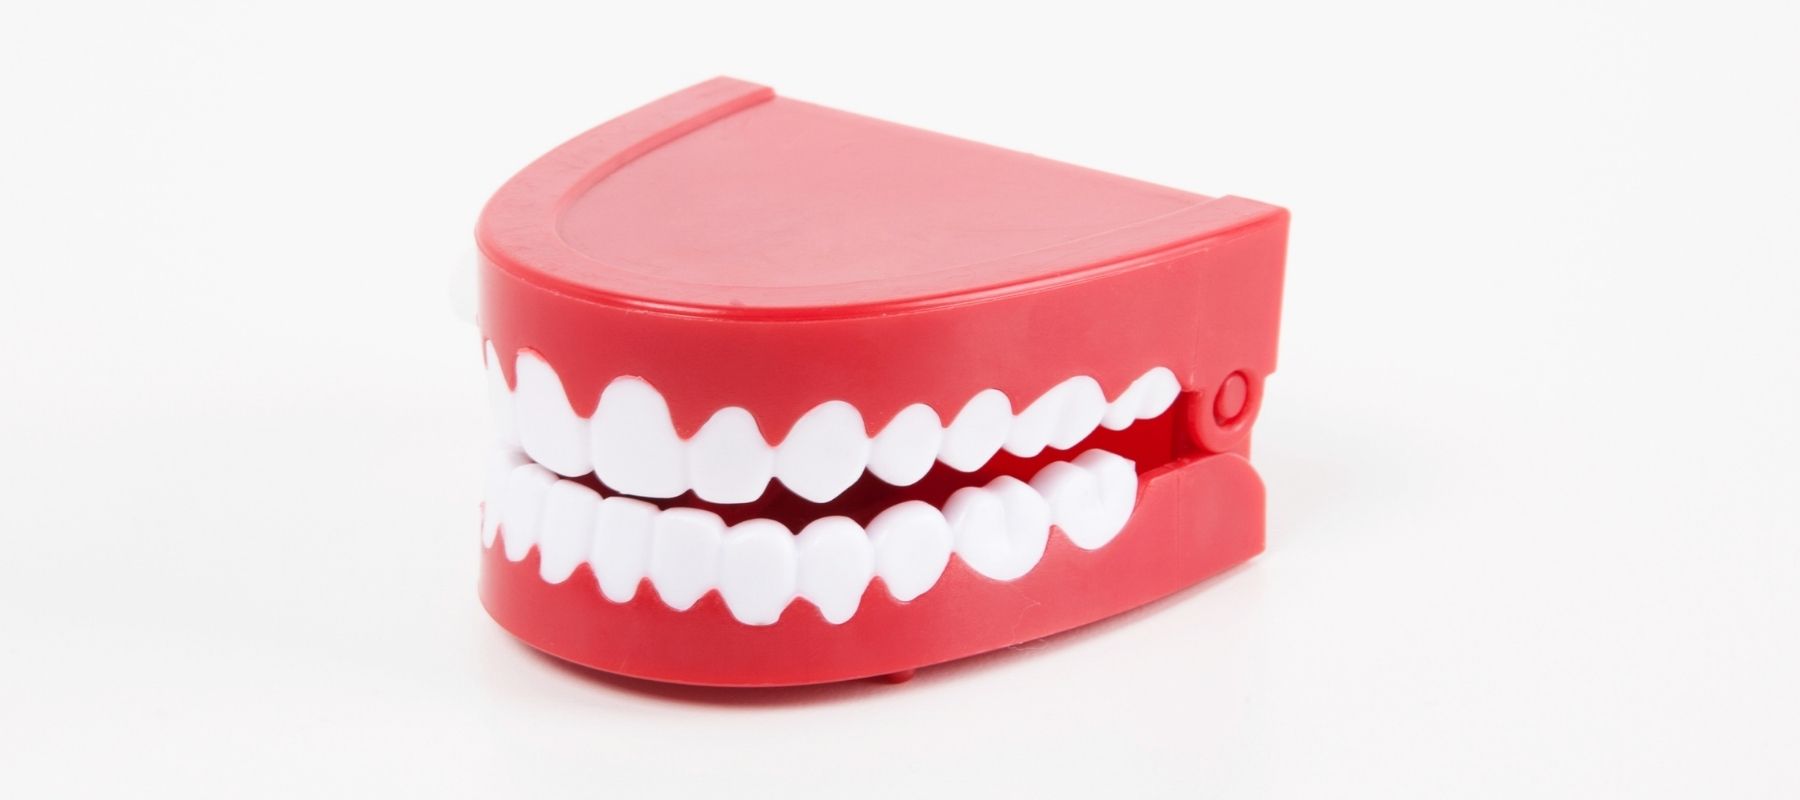 Wind-up teeth against a plain white background